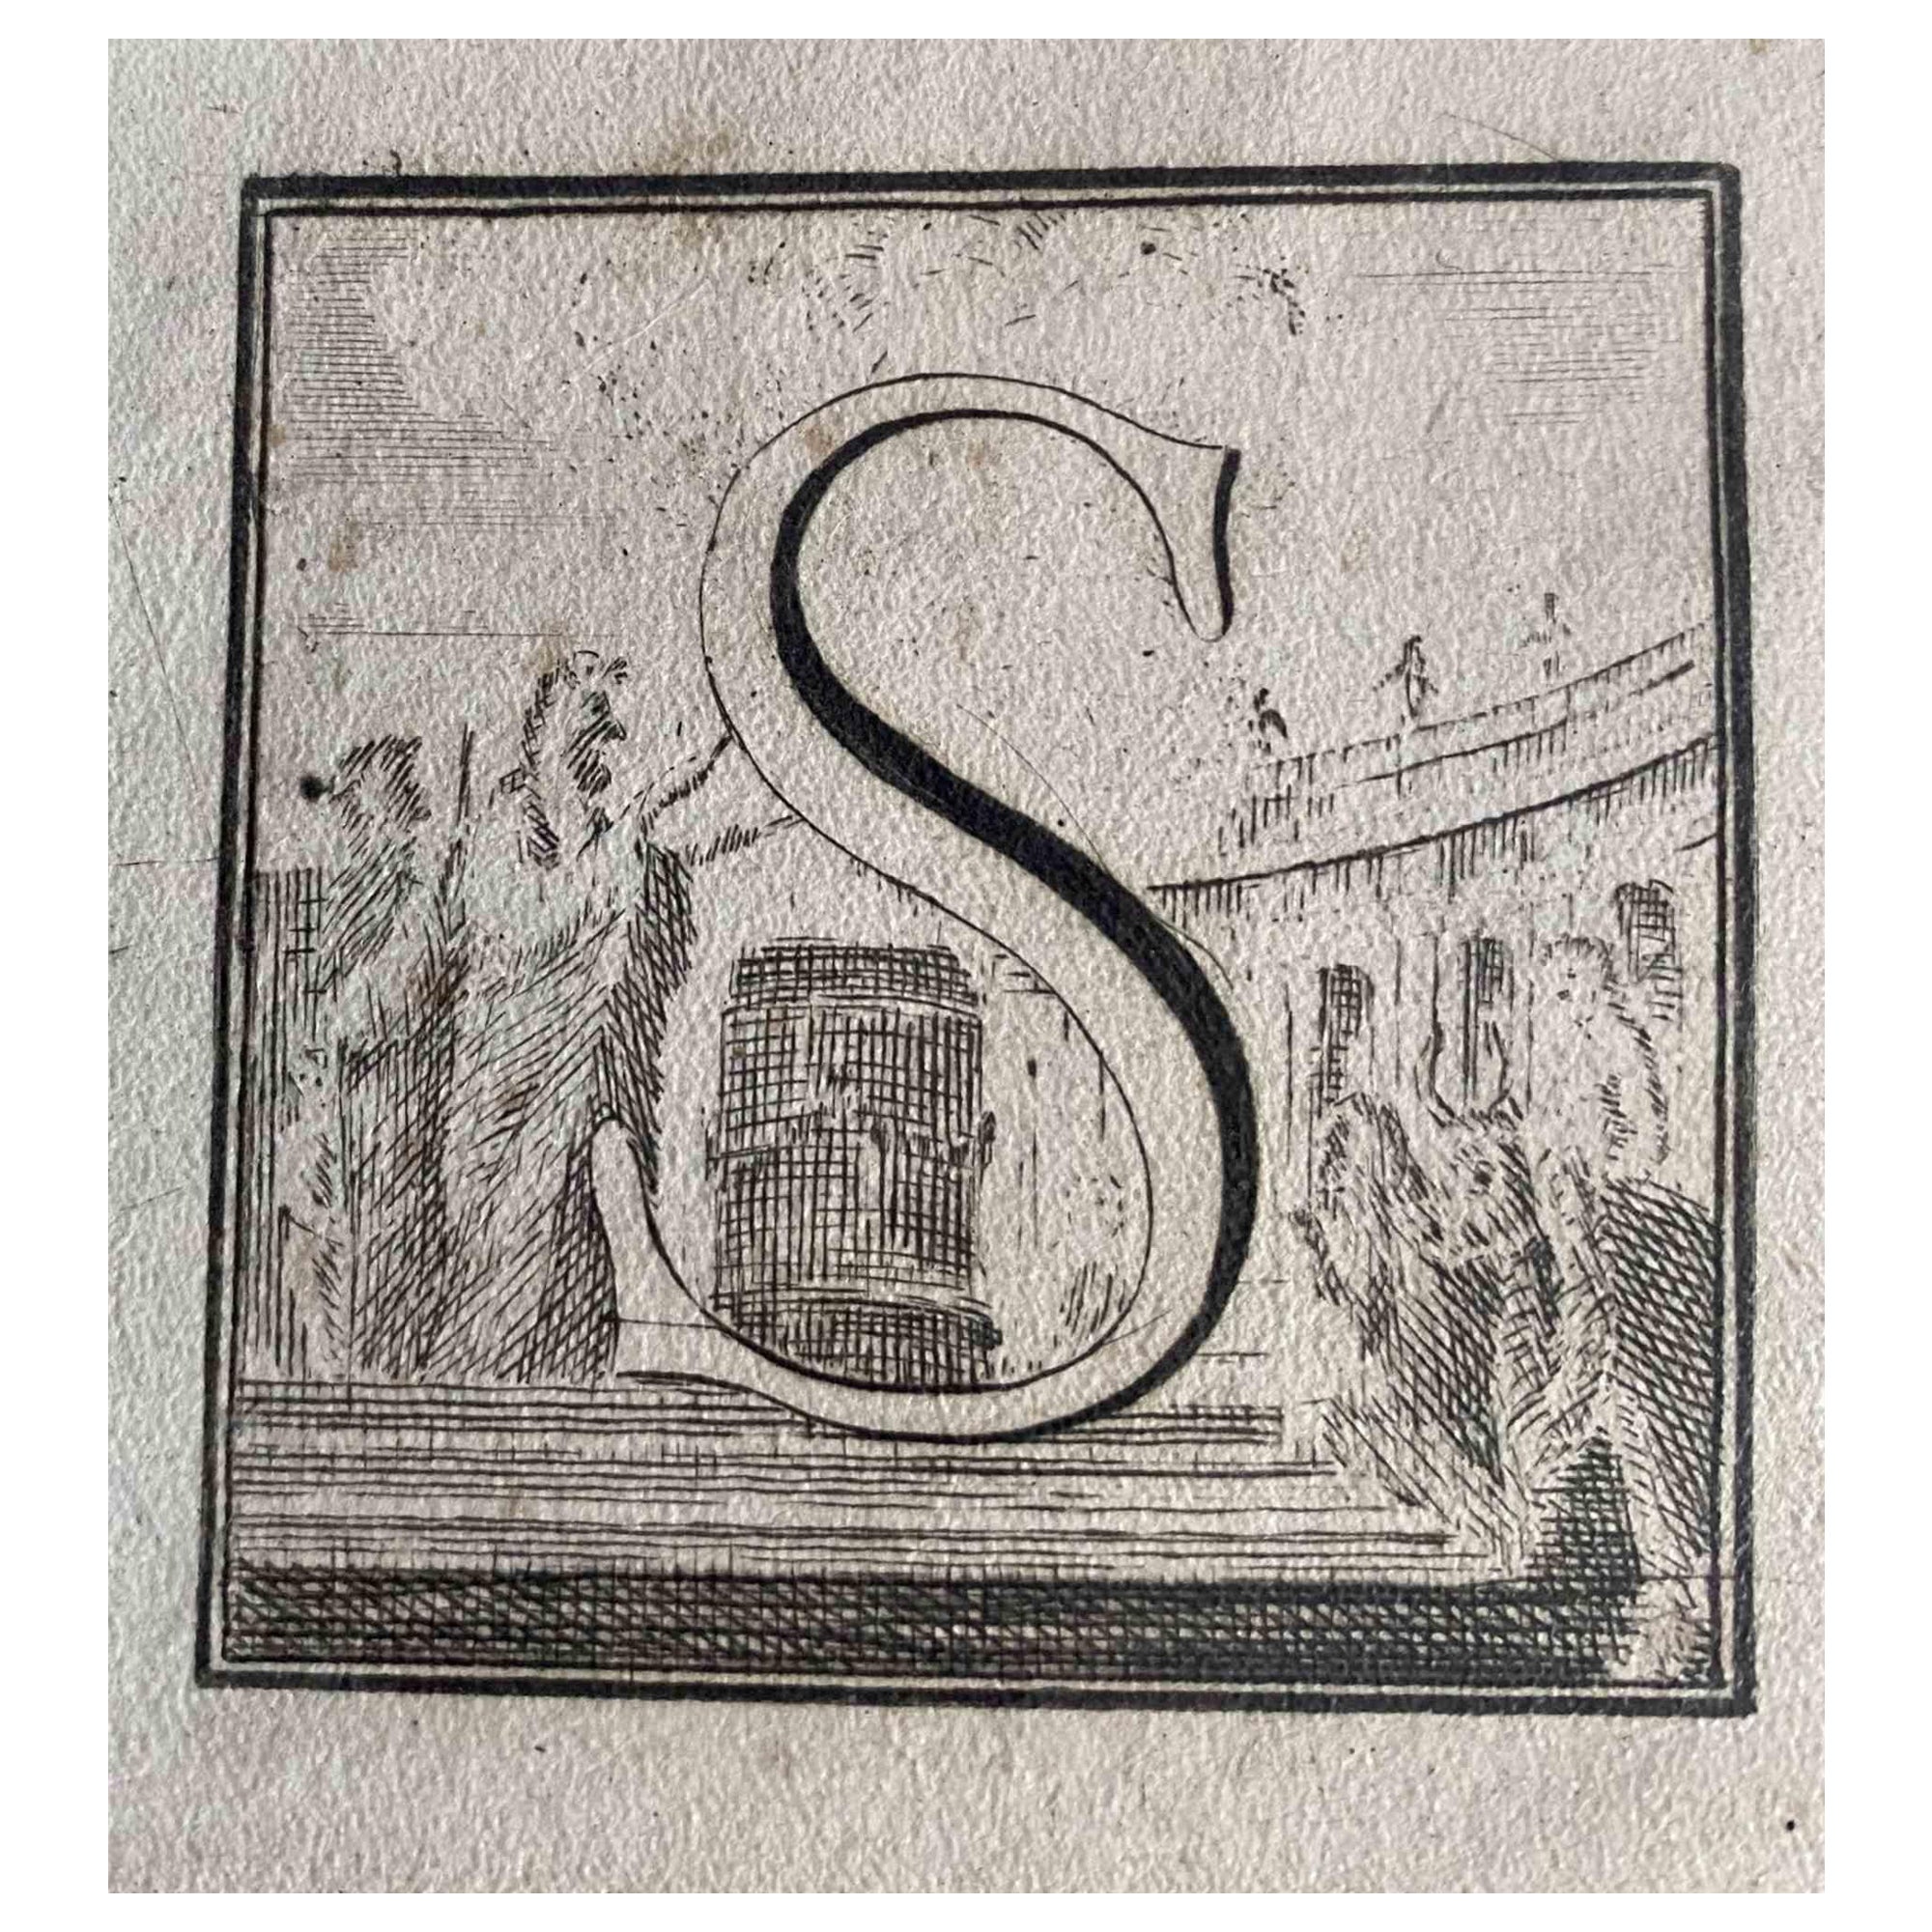 Unknown Figurative Print - Antiquities of Herculaneum -  Letter S - Etching  - 18th Century